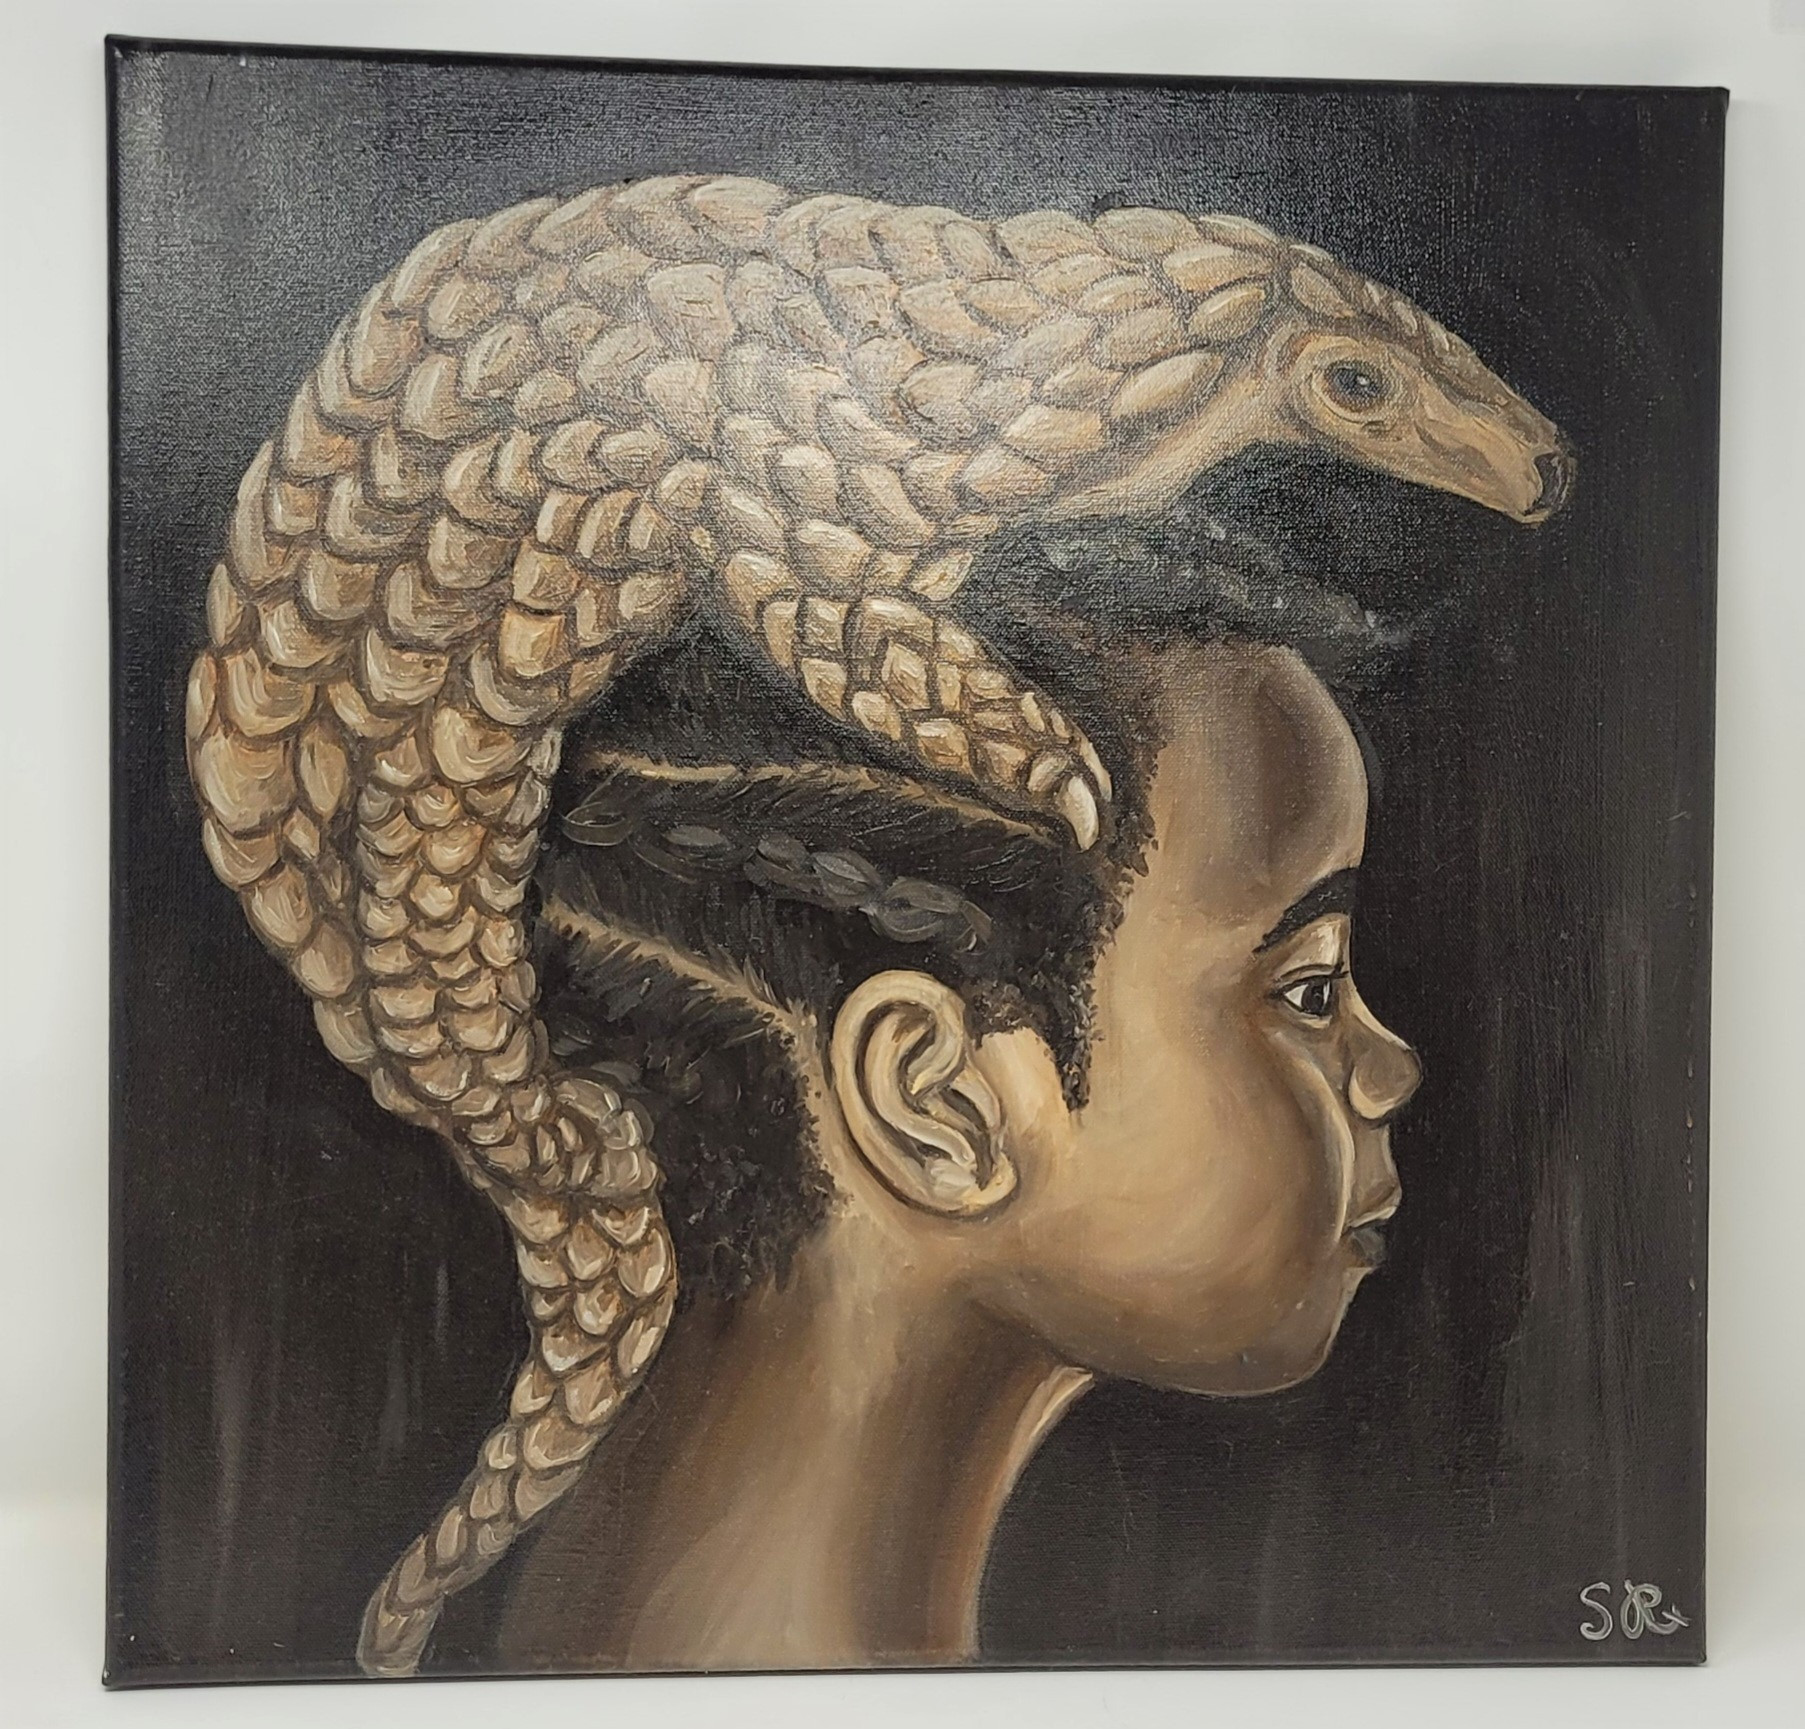 Oil painting focuses on endangered pangolins and the export of their scales